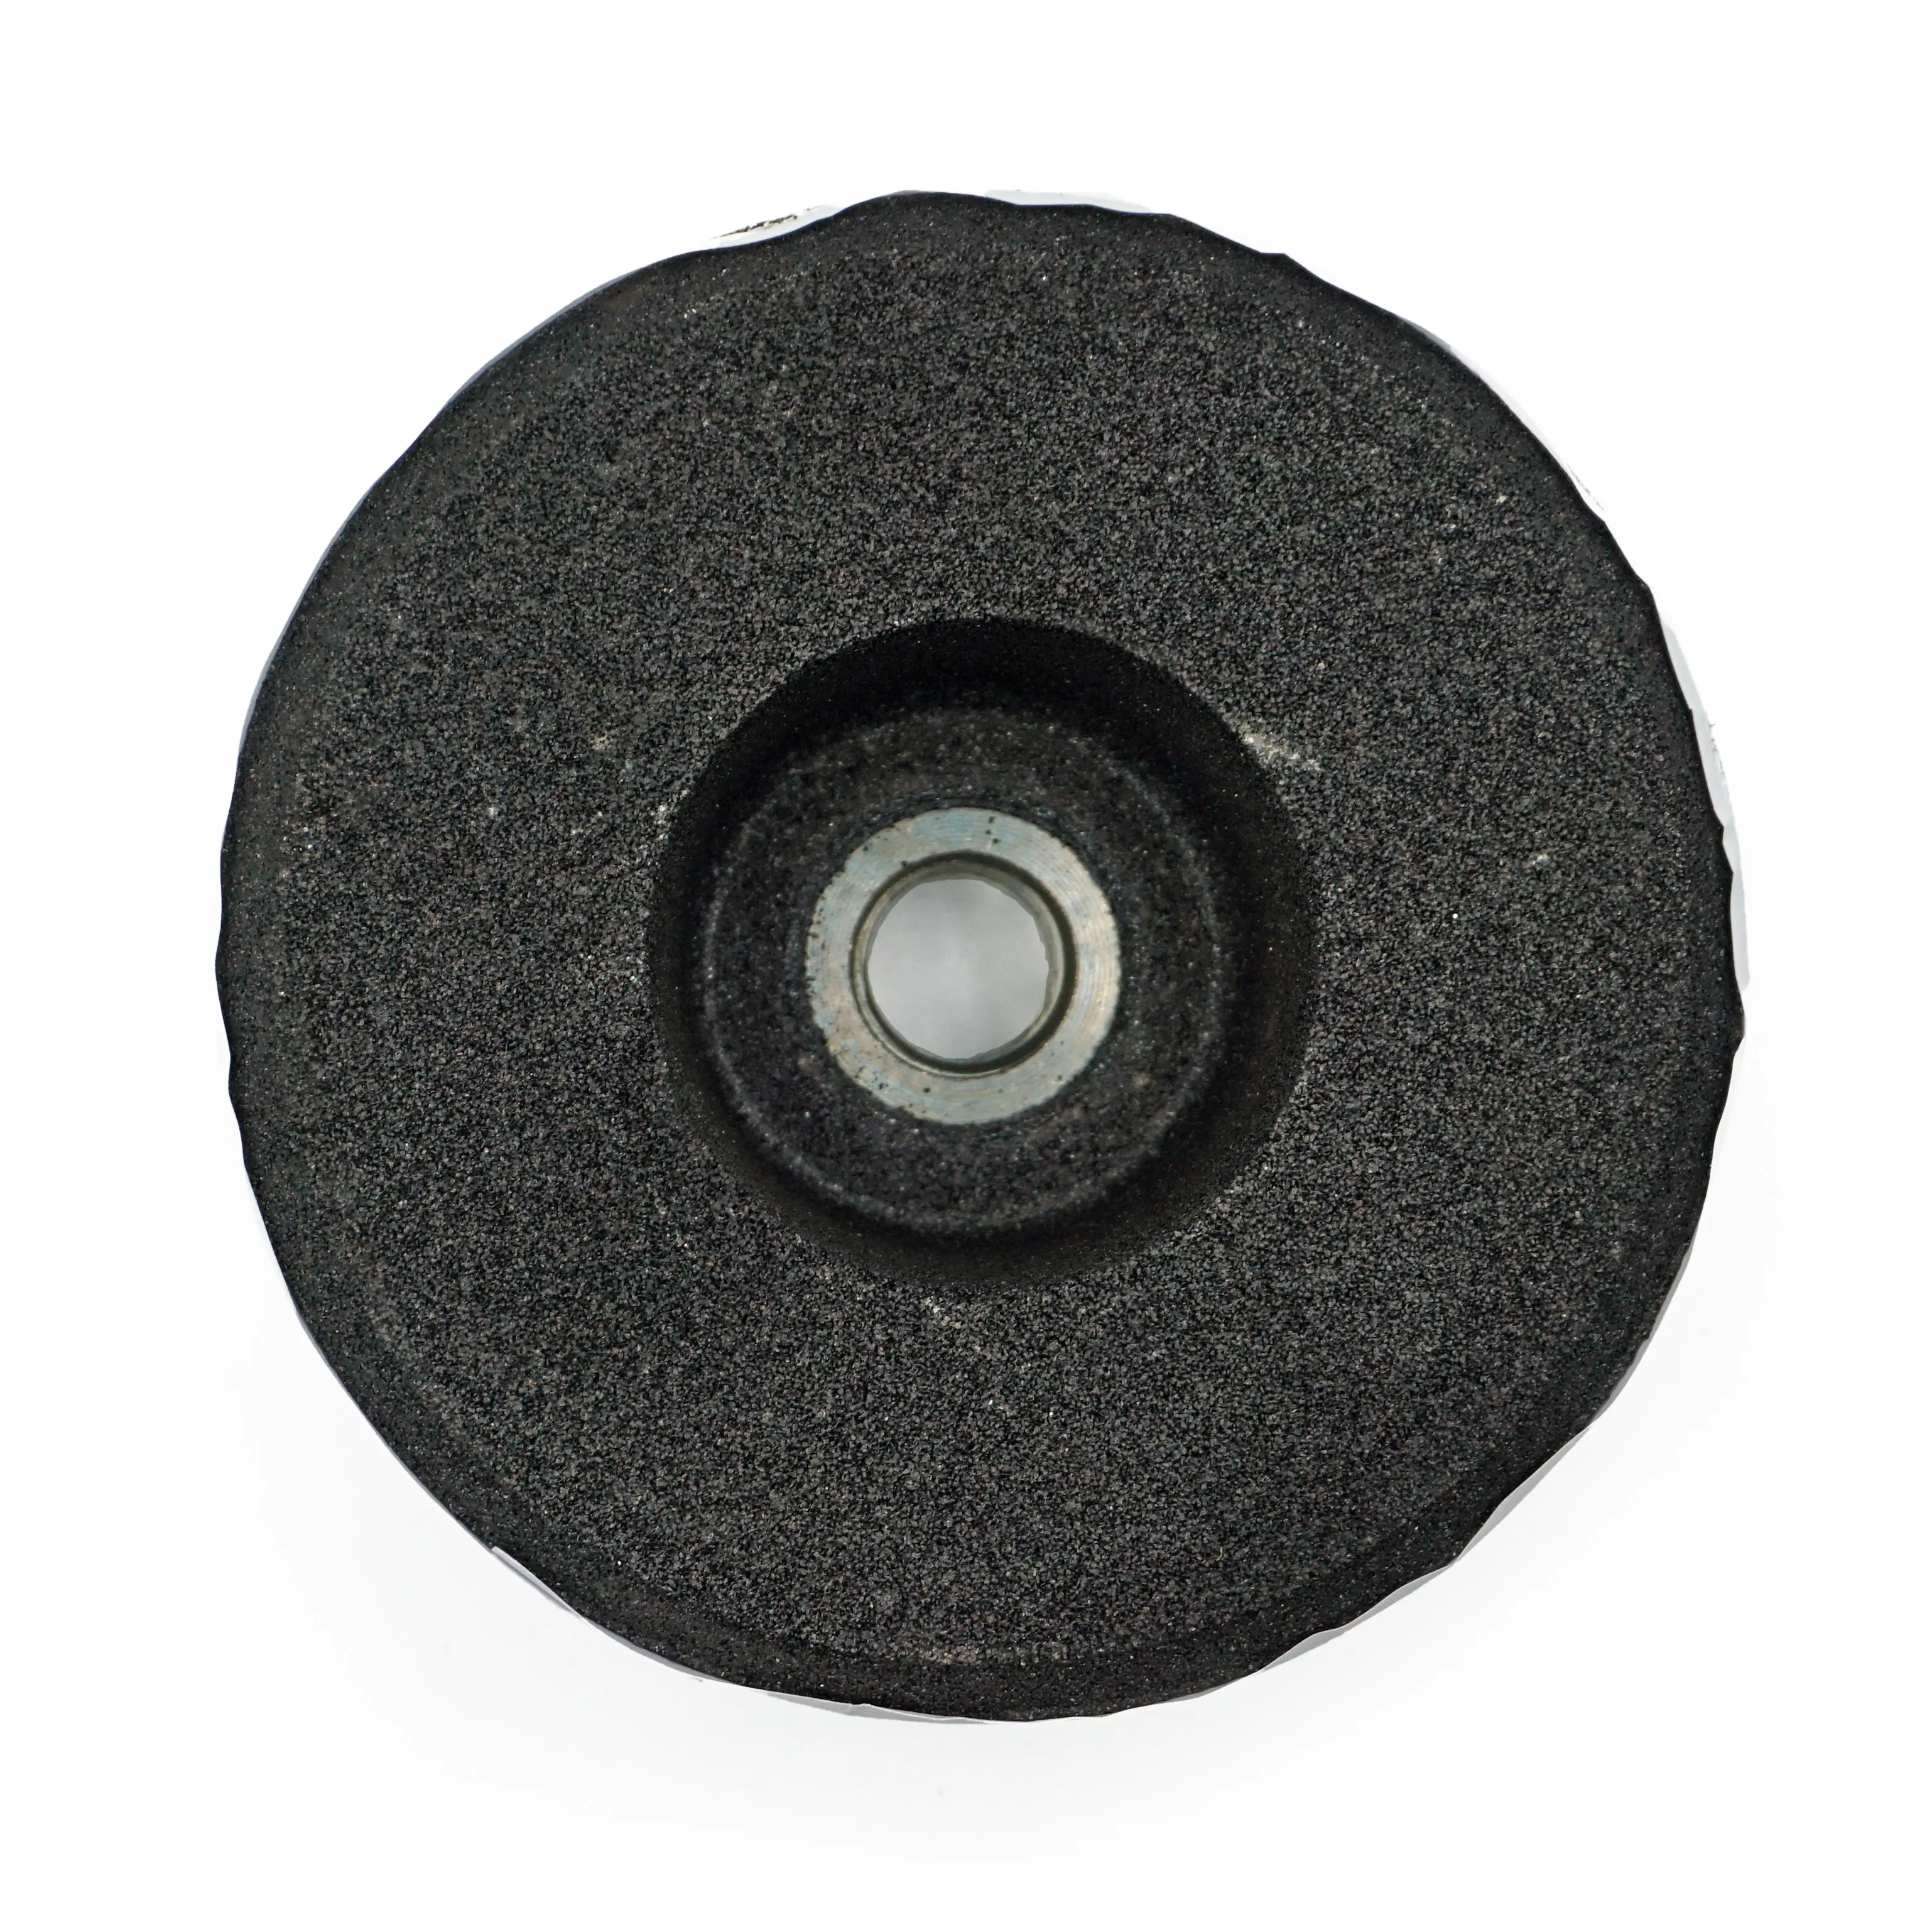 4in 100mm M14 5/8"-11 Black Cup Shaped Silicon Carbide Stone Grinding Wheel Abrasive Tools For Marble Granite Natural Stone